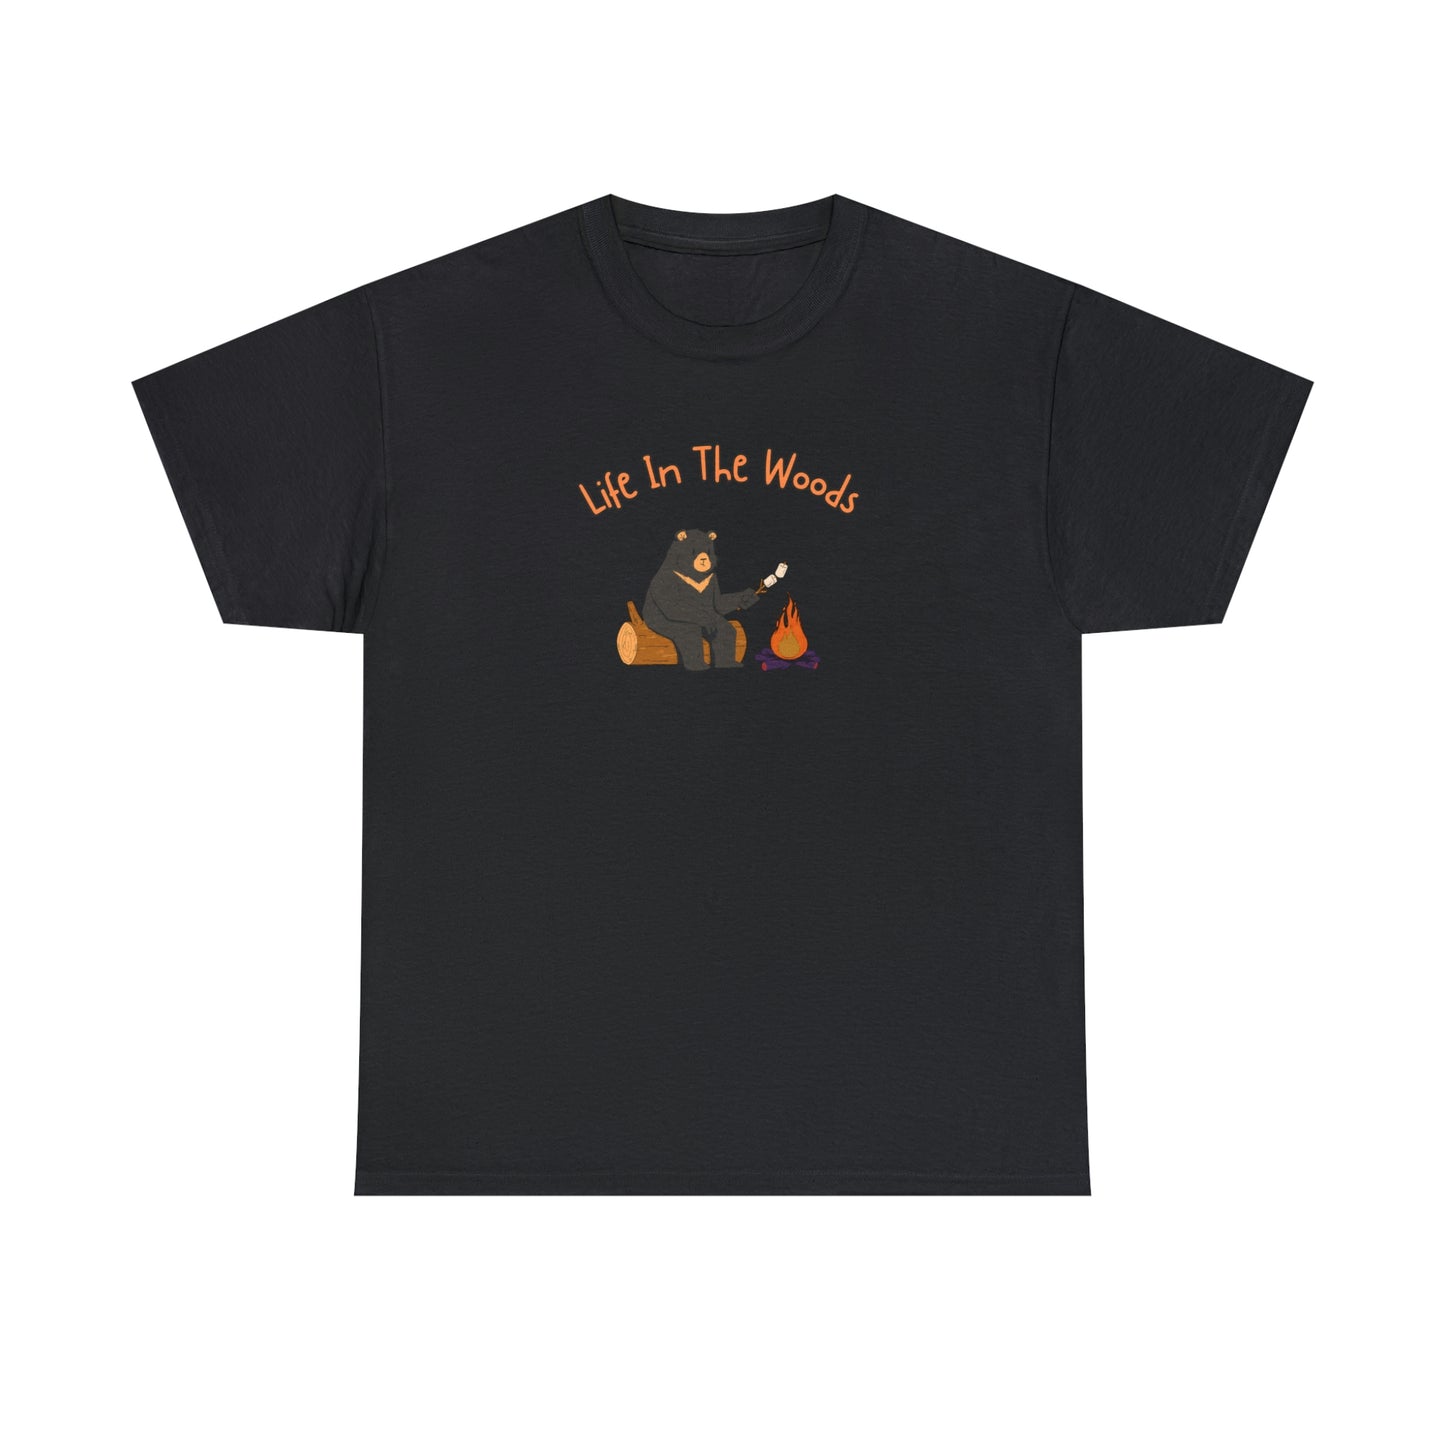 Life in the Woods Tee